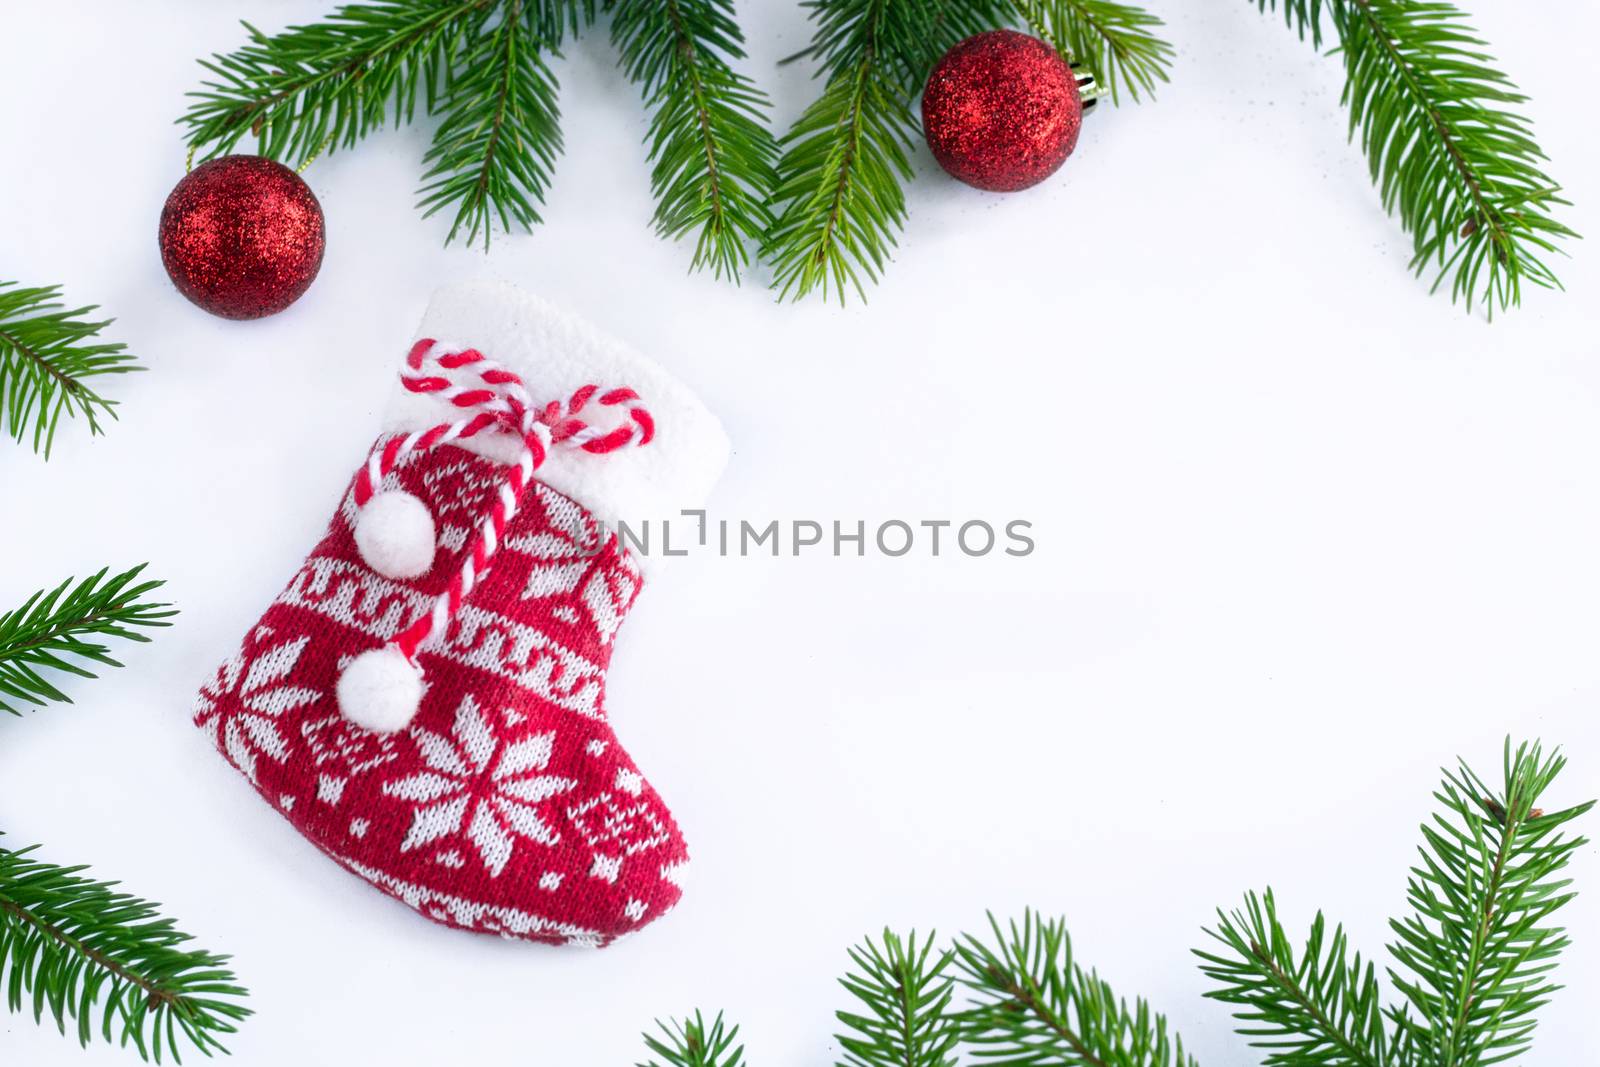 Red Christmas stocking sock and balls on white background, frame by VeraVerano